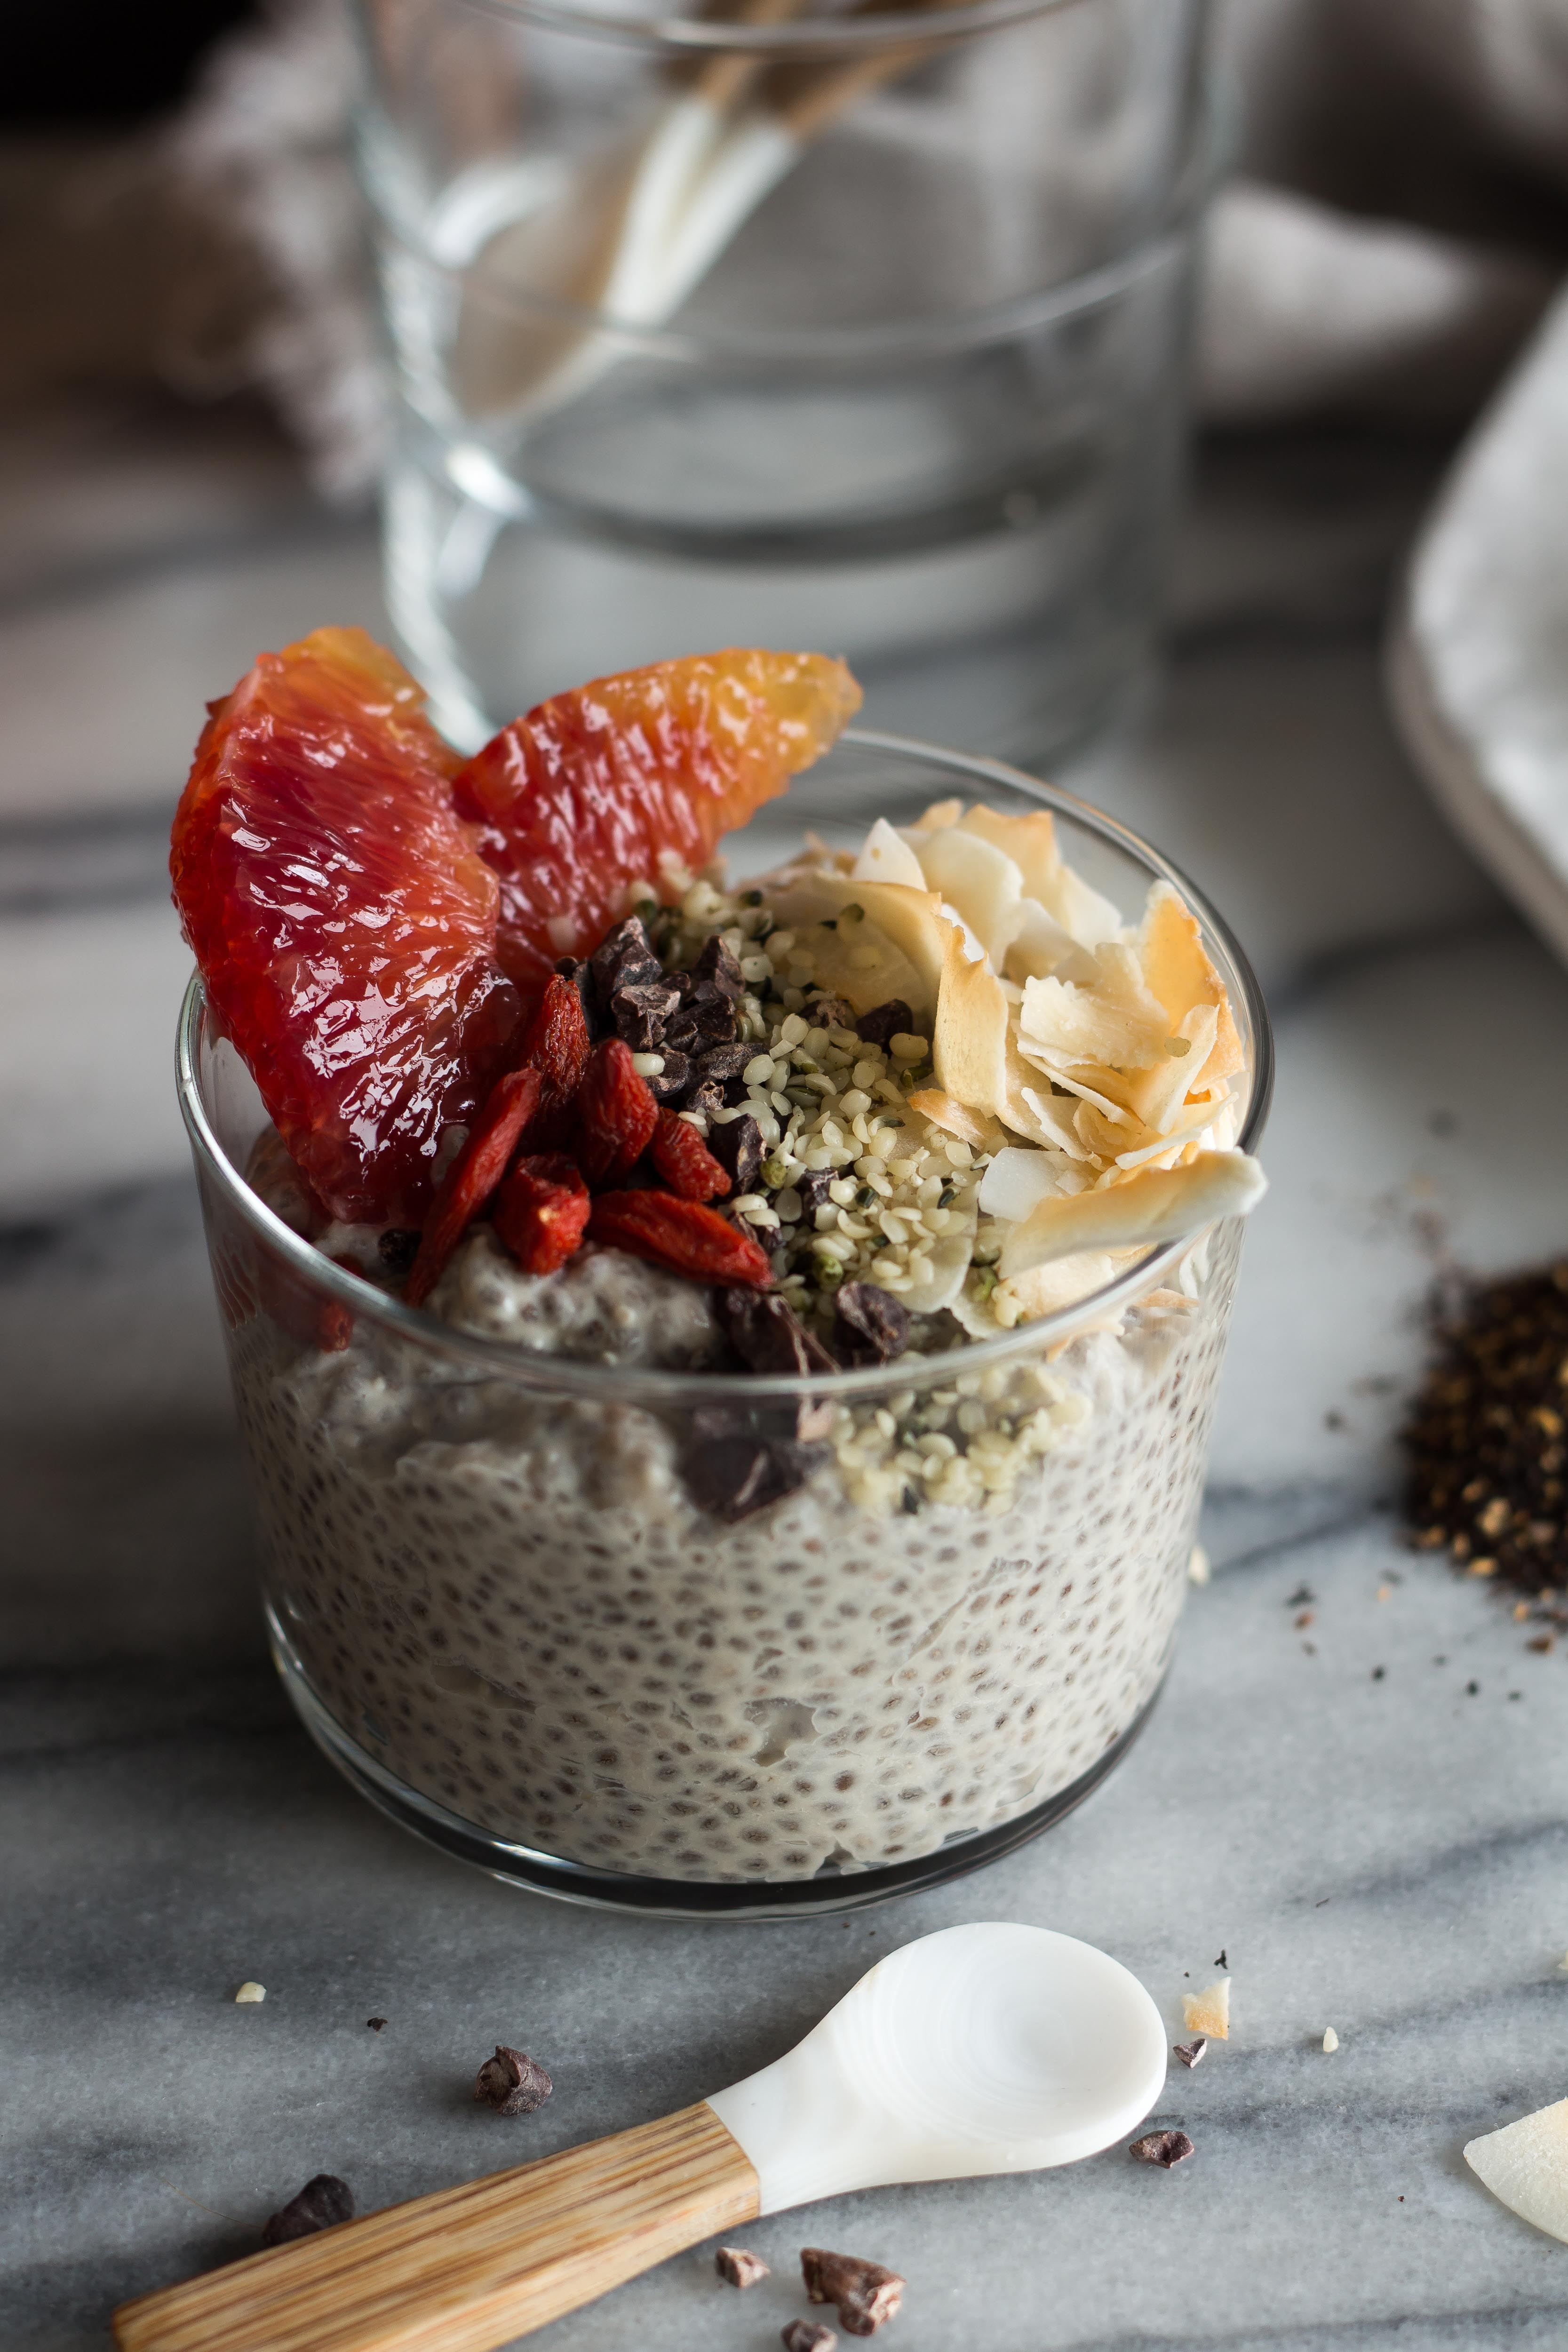 Start the day with a wonderfully healthy Coconut Chai Chia Pudding recipe made with blissful chai tea, steeped-coconut milk, then topped with a myriad of super foods, including chia seeds.